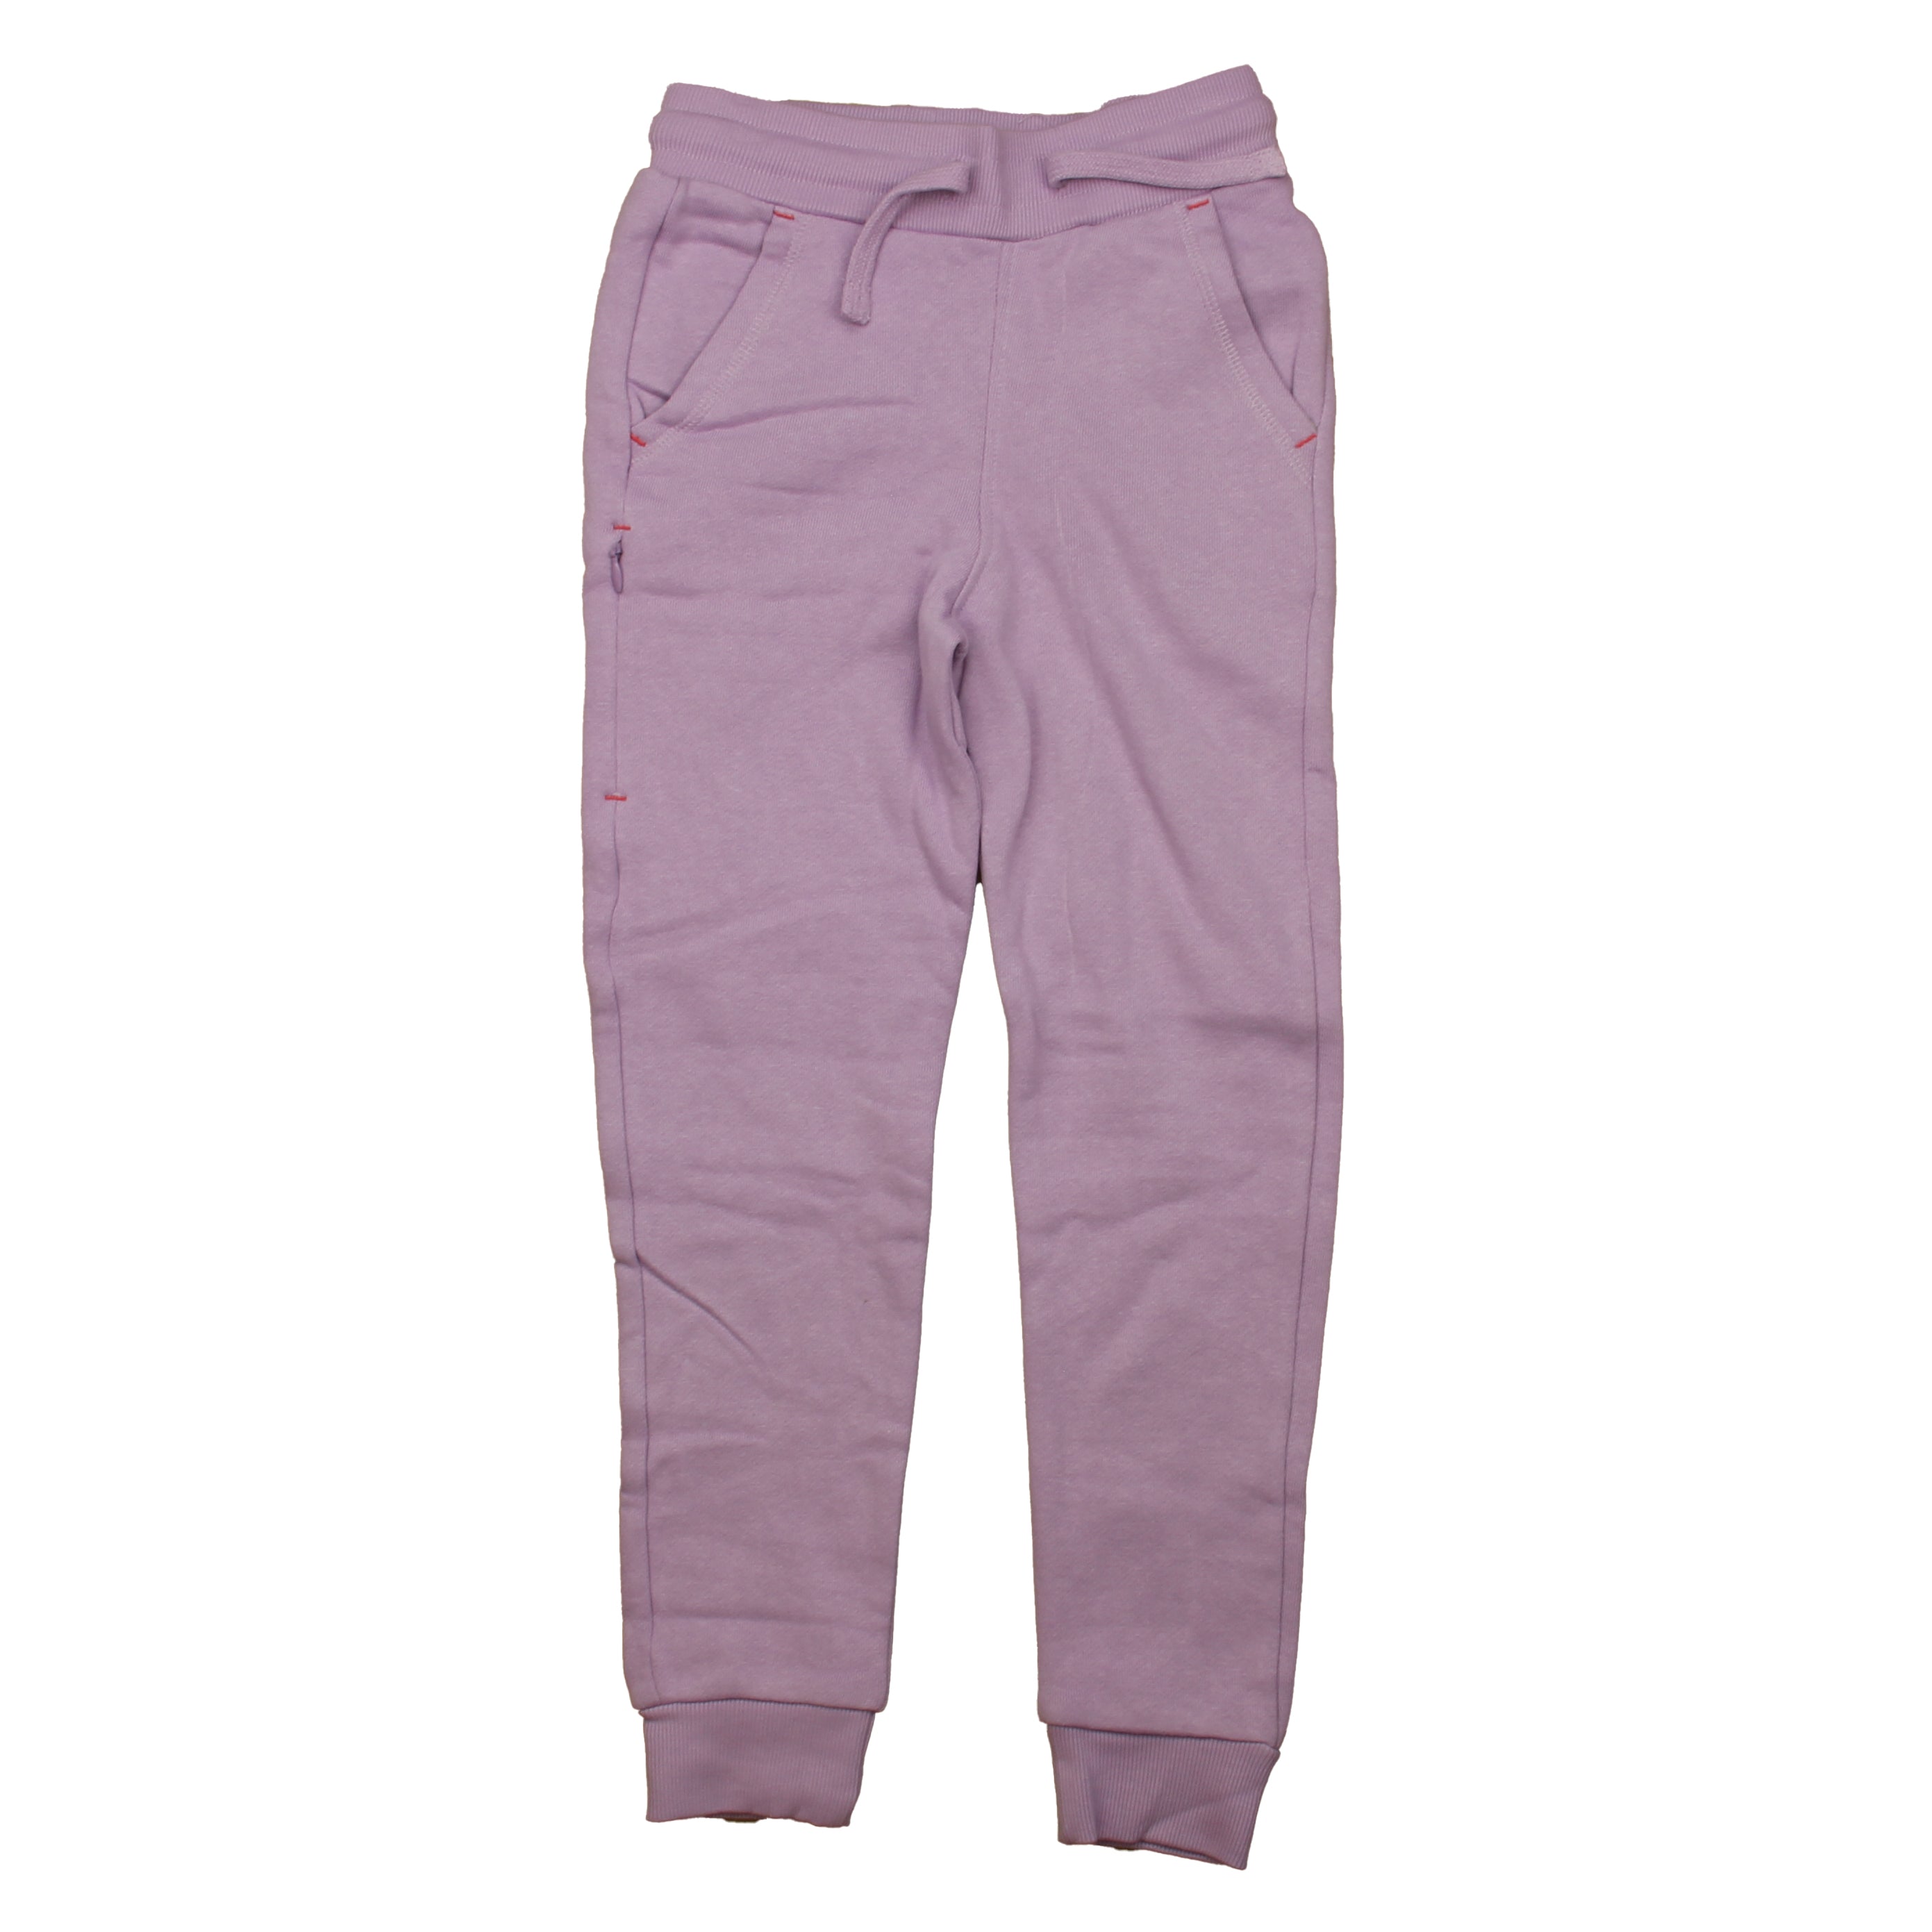 Pre-owned Lilac Pants size: 6-7 Years